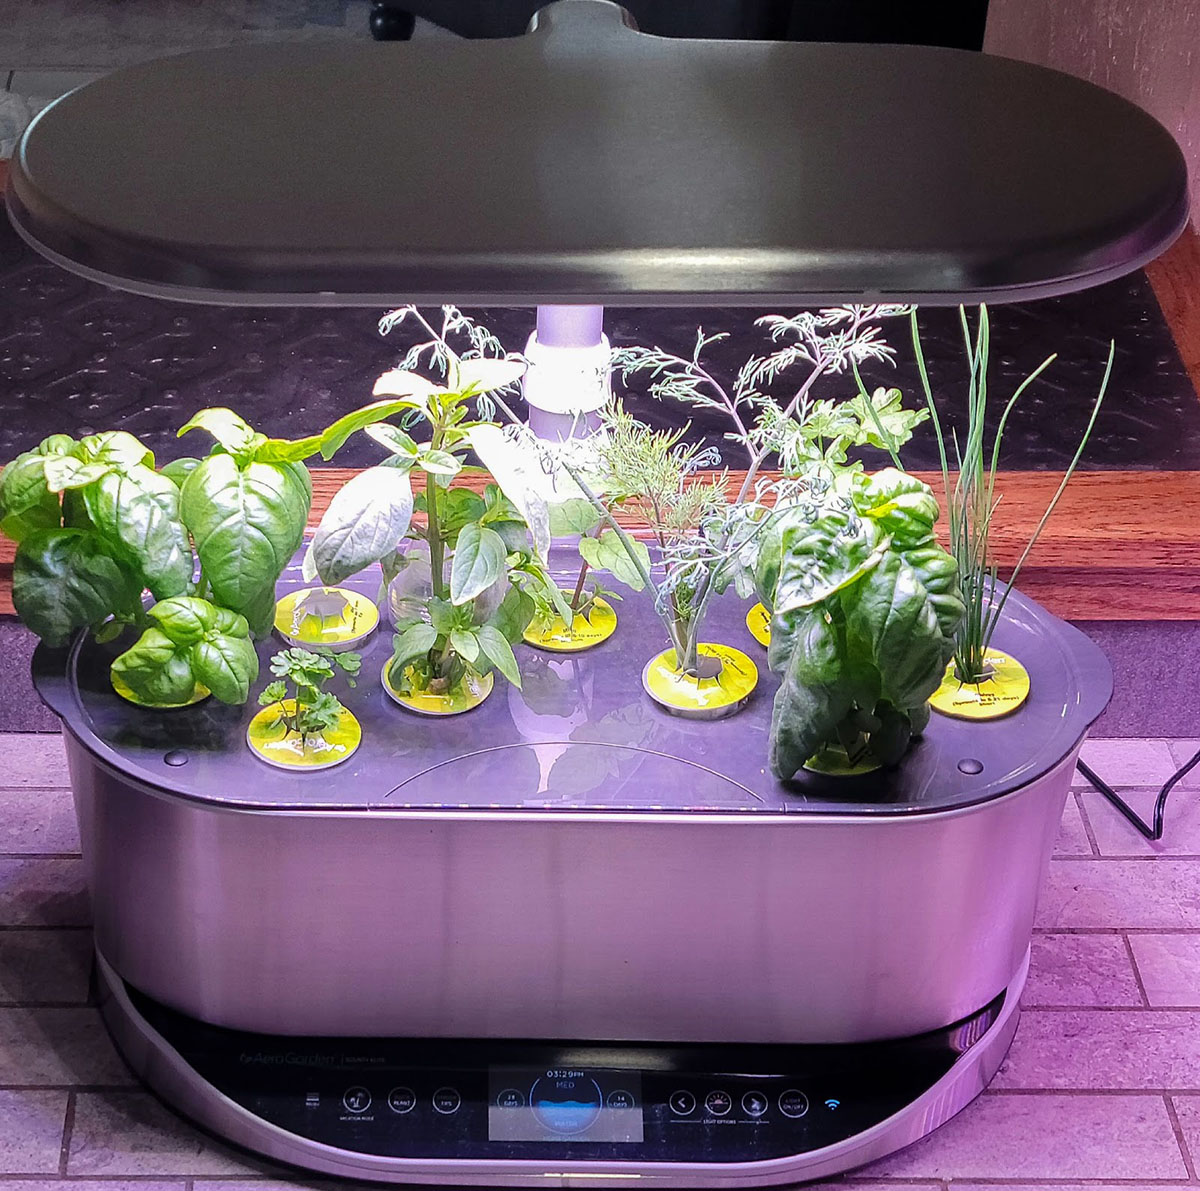 The AeroGarden Bounty Elite Indoor Garden with each of its ports filled with plants in various stages of growth.